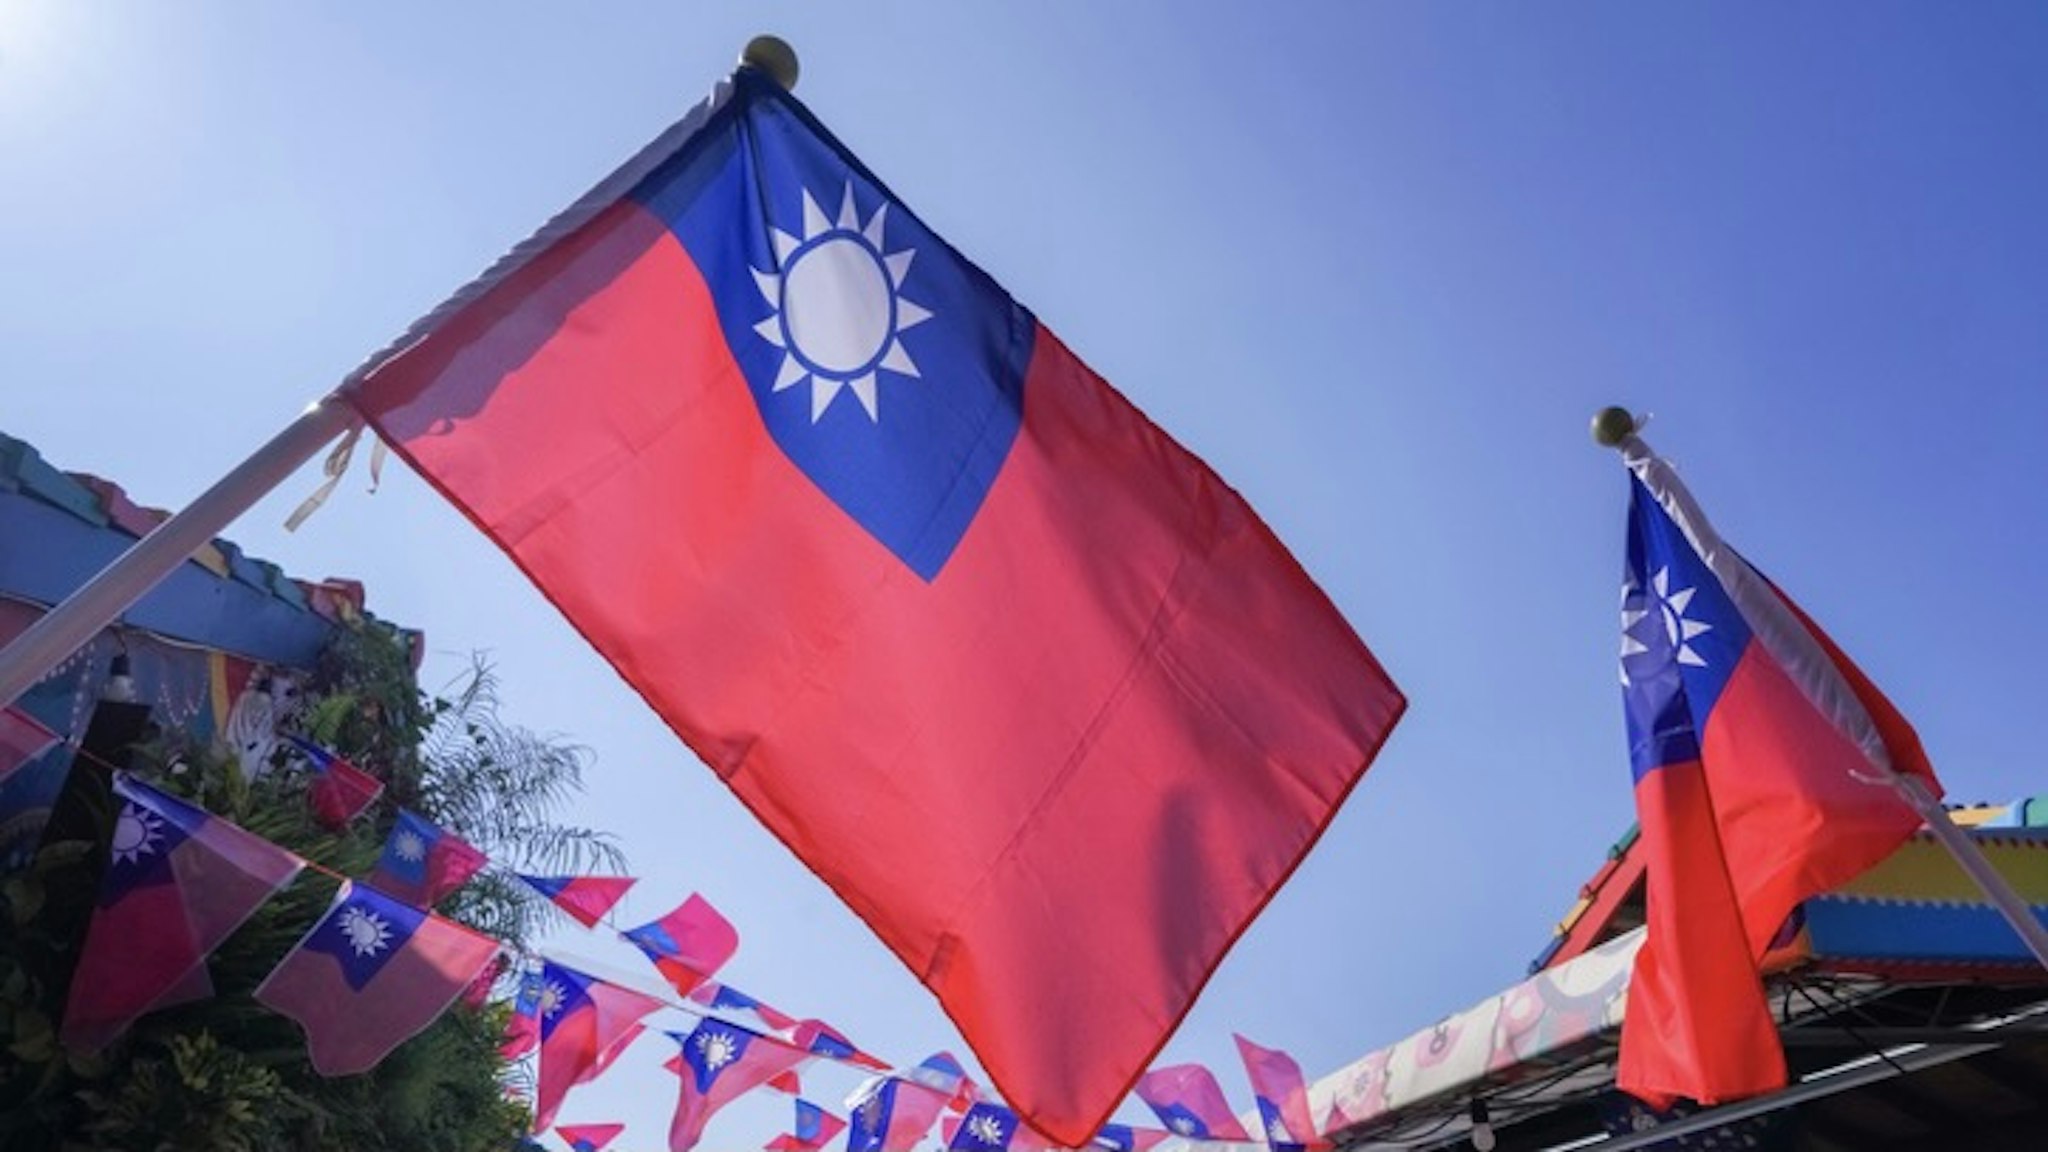 Taiwanese national flags against clear blue sky - stock photo Taiwan is small island country in east Asia, this photo was taken at rainbow village in Taichung the second largest city in Taiwan pratan ounpitipong via Getty Images